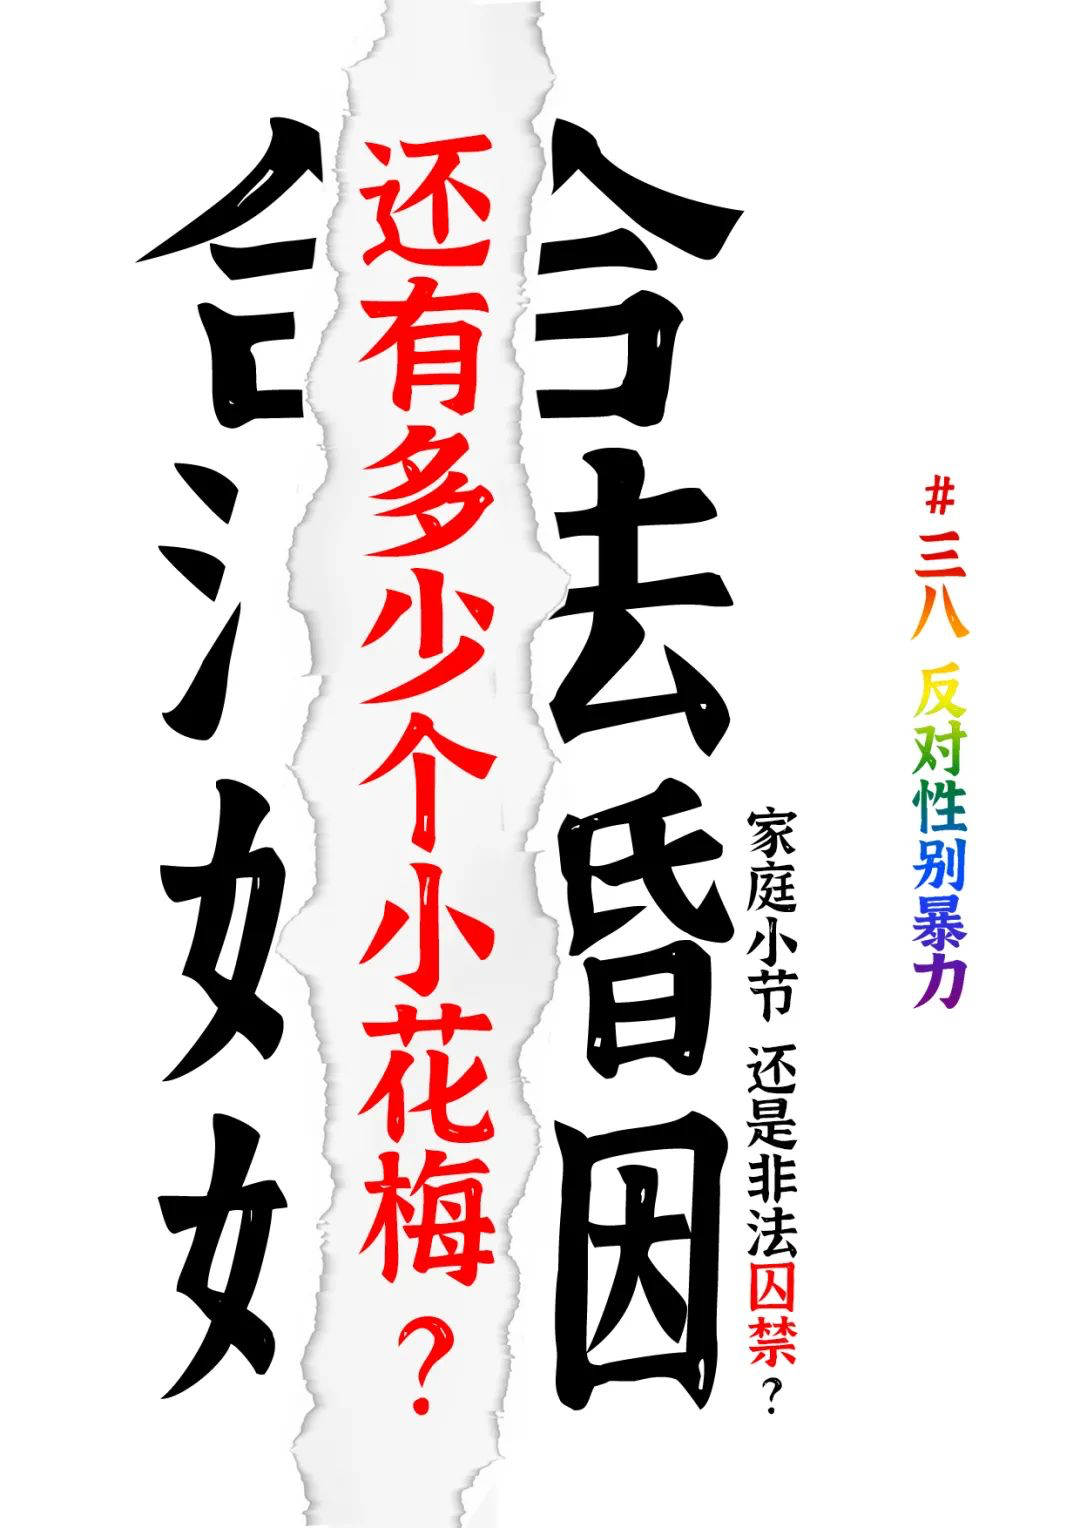 A red, black and white poster shows the words “Lawful marriage” ripped in half, and includes the sentences “How many other Xiaohuameis are there?” and “A minor domestic matter, or illegal imprisonment?” and the hashtag #March8FightGender-BasedViolence.